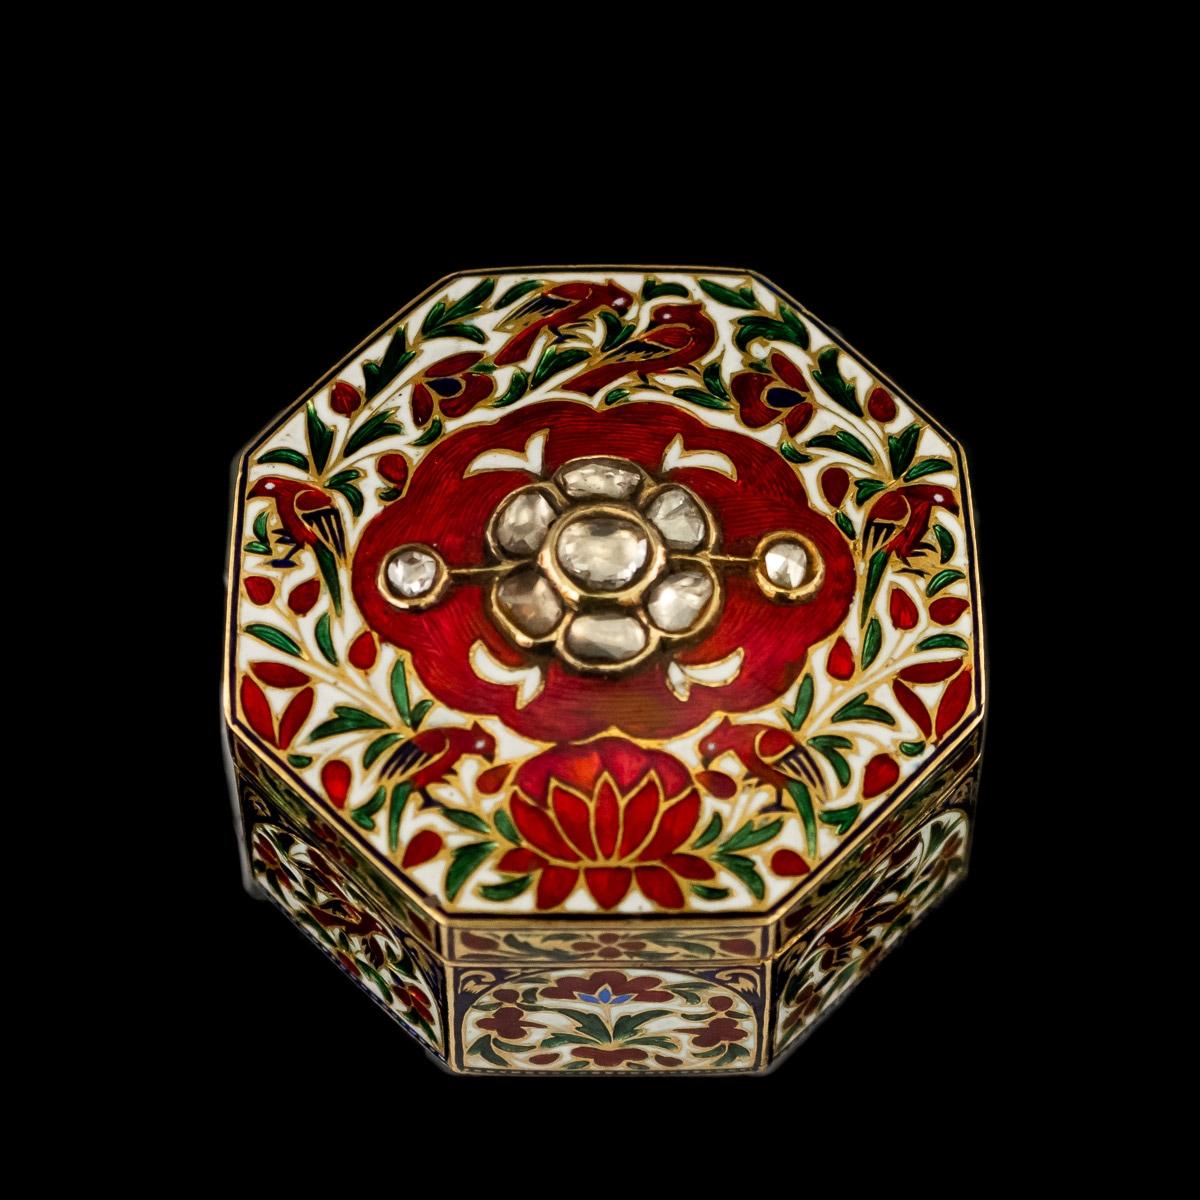 Antique late 19th century Indian gem set, 18-karat gold and enamel box, of octagonal form, the top inset with old cut diamonds in a shape of a flower, the base enamelled with an intricate floral spray and a pair of vibrant blue parakeets in the